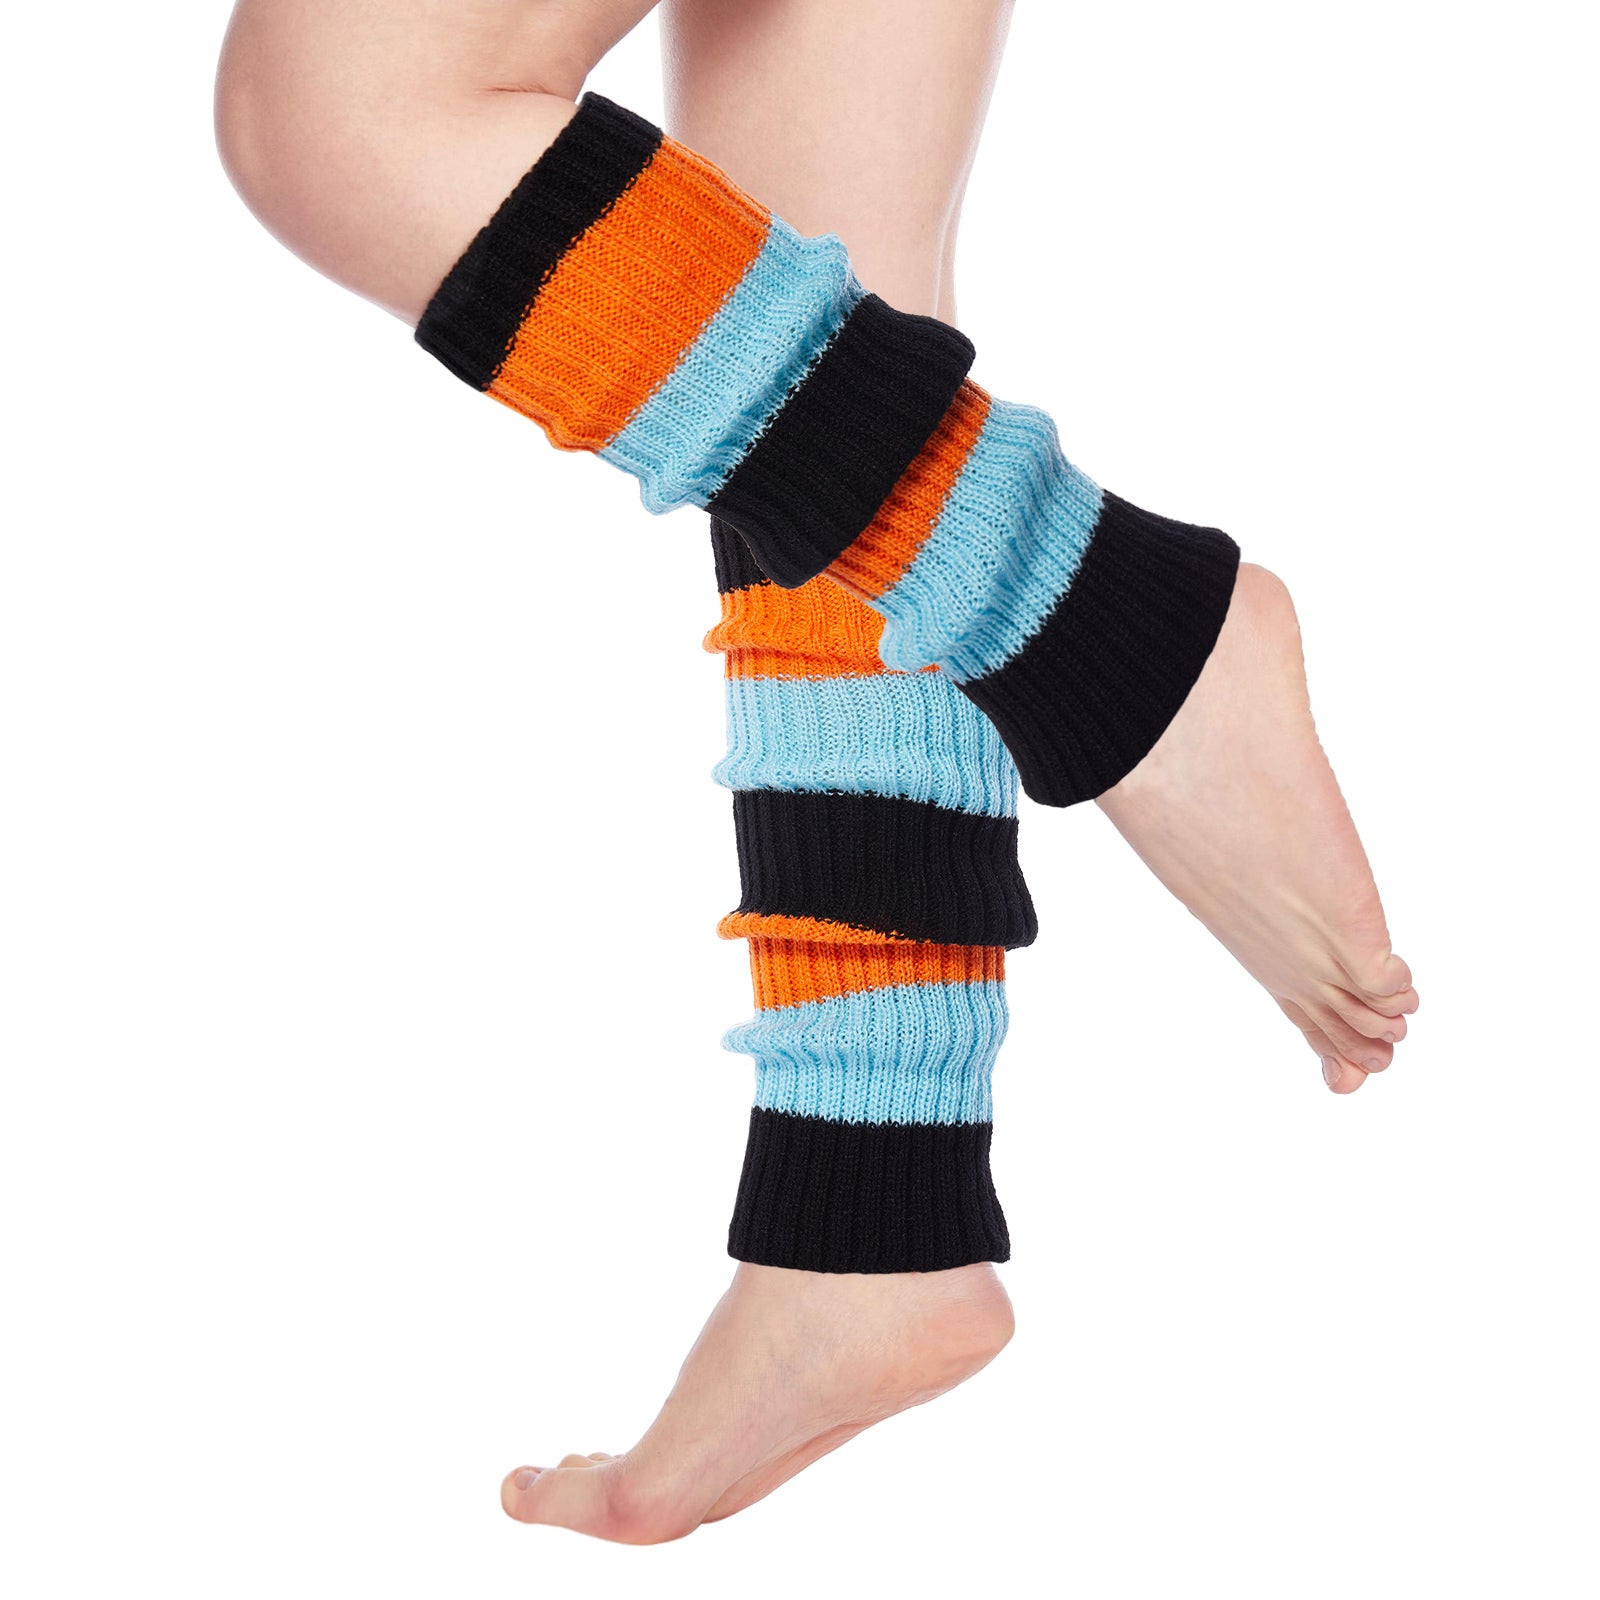 Womens Leg Warmers Neon Knitted for 80s Party Sports Yoga-Black & Blue & Bright Orange